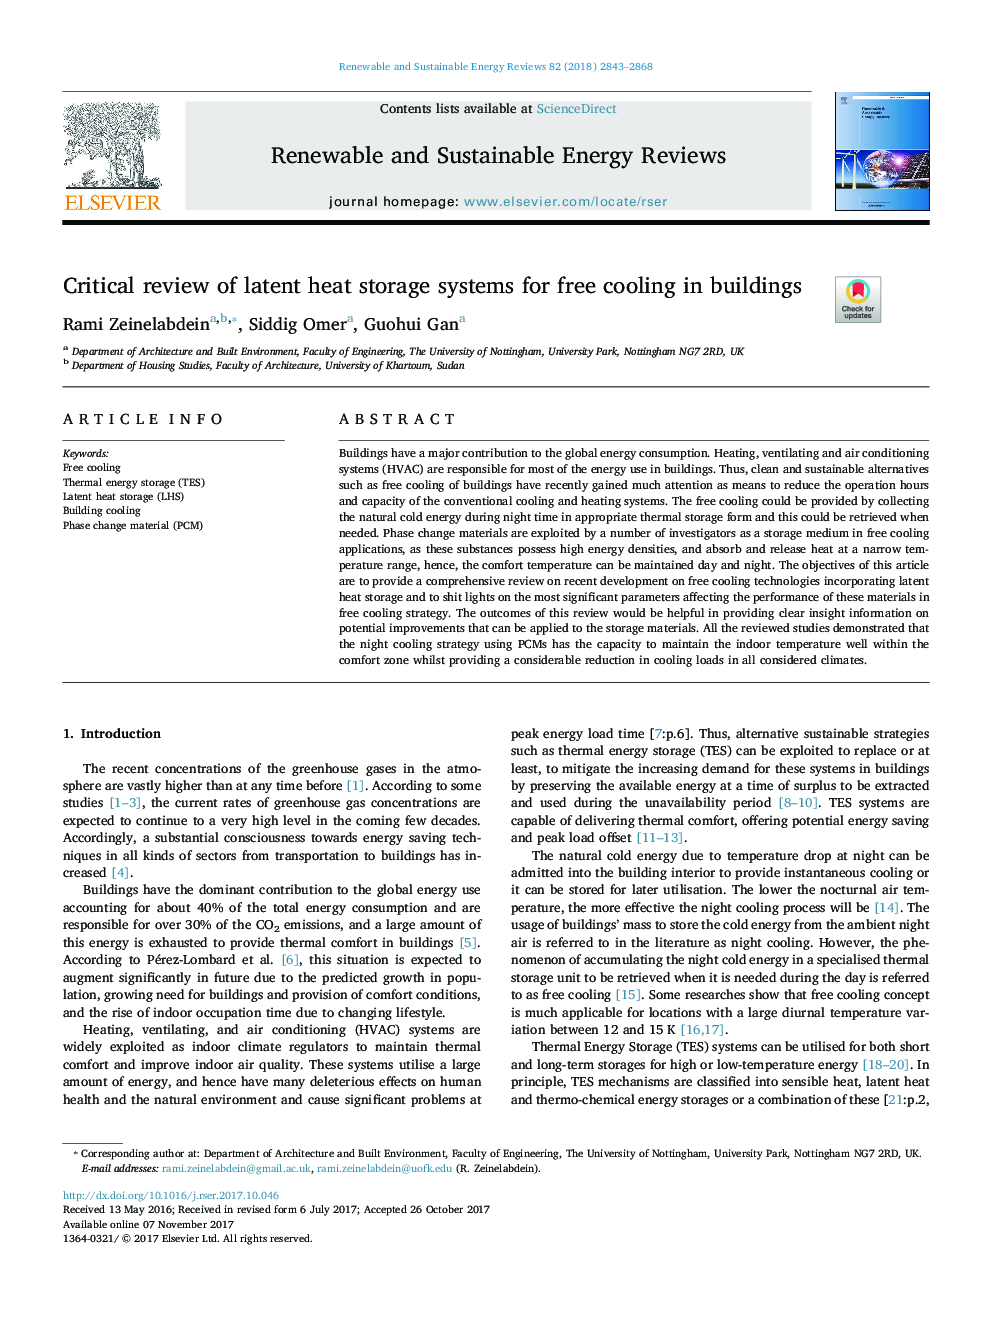 Critical review of latent heat storage systems for free cooling in buildings